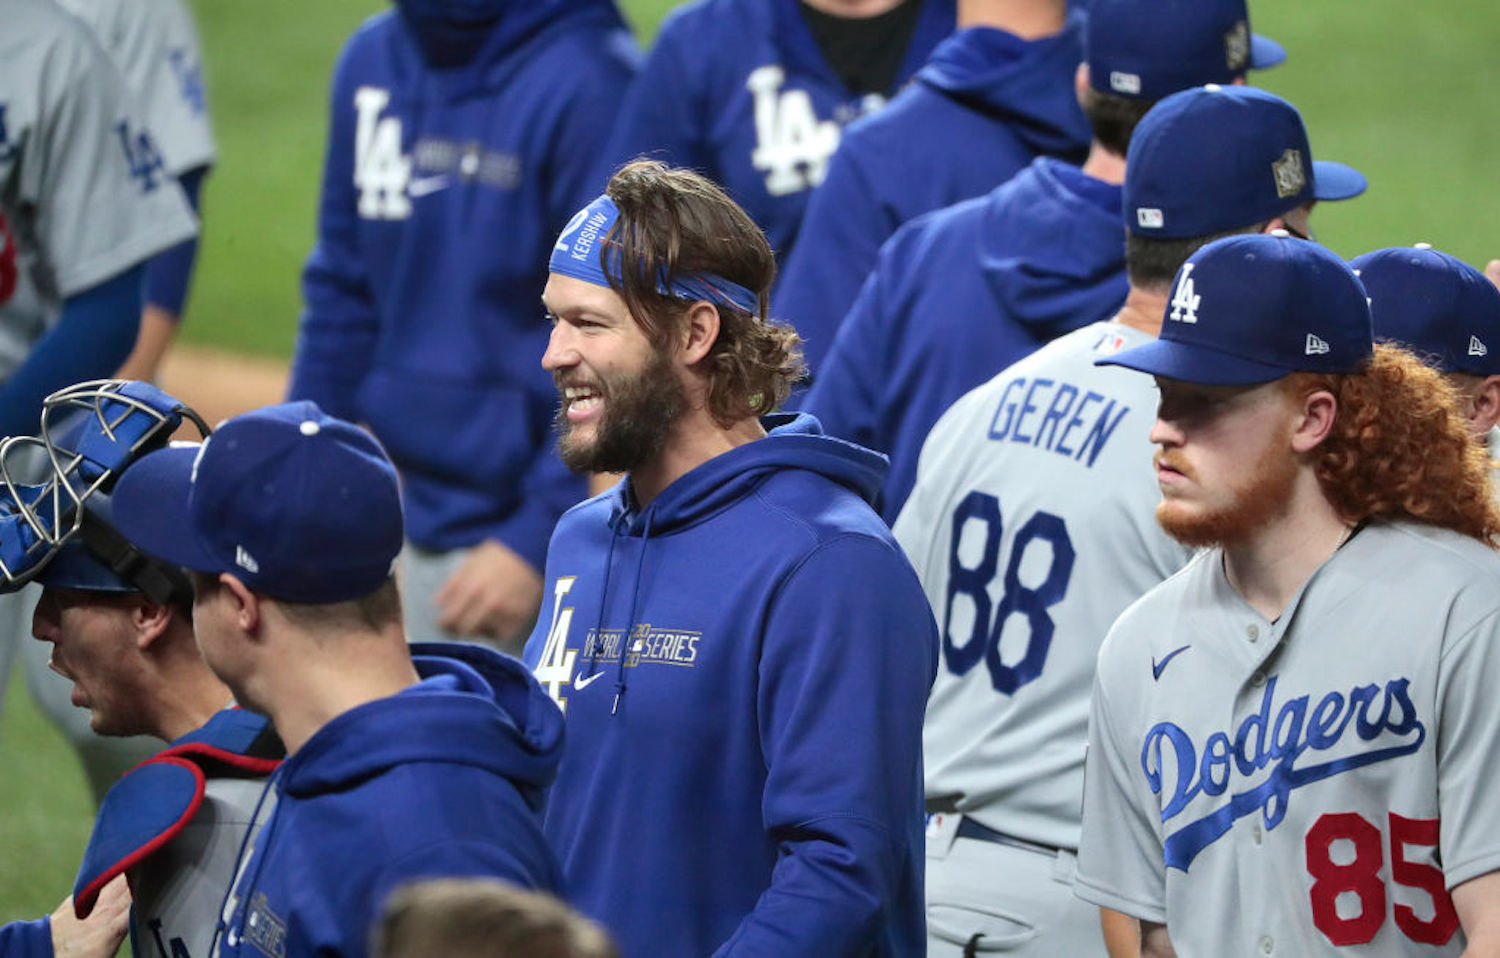 The LA Dodgers have spent $3.69 billion on payroll since their last World Series title 32 years ago, and it's finally about to pay off.